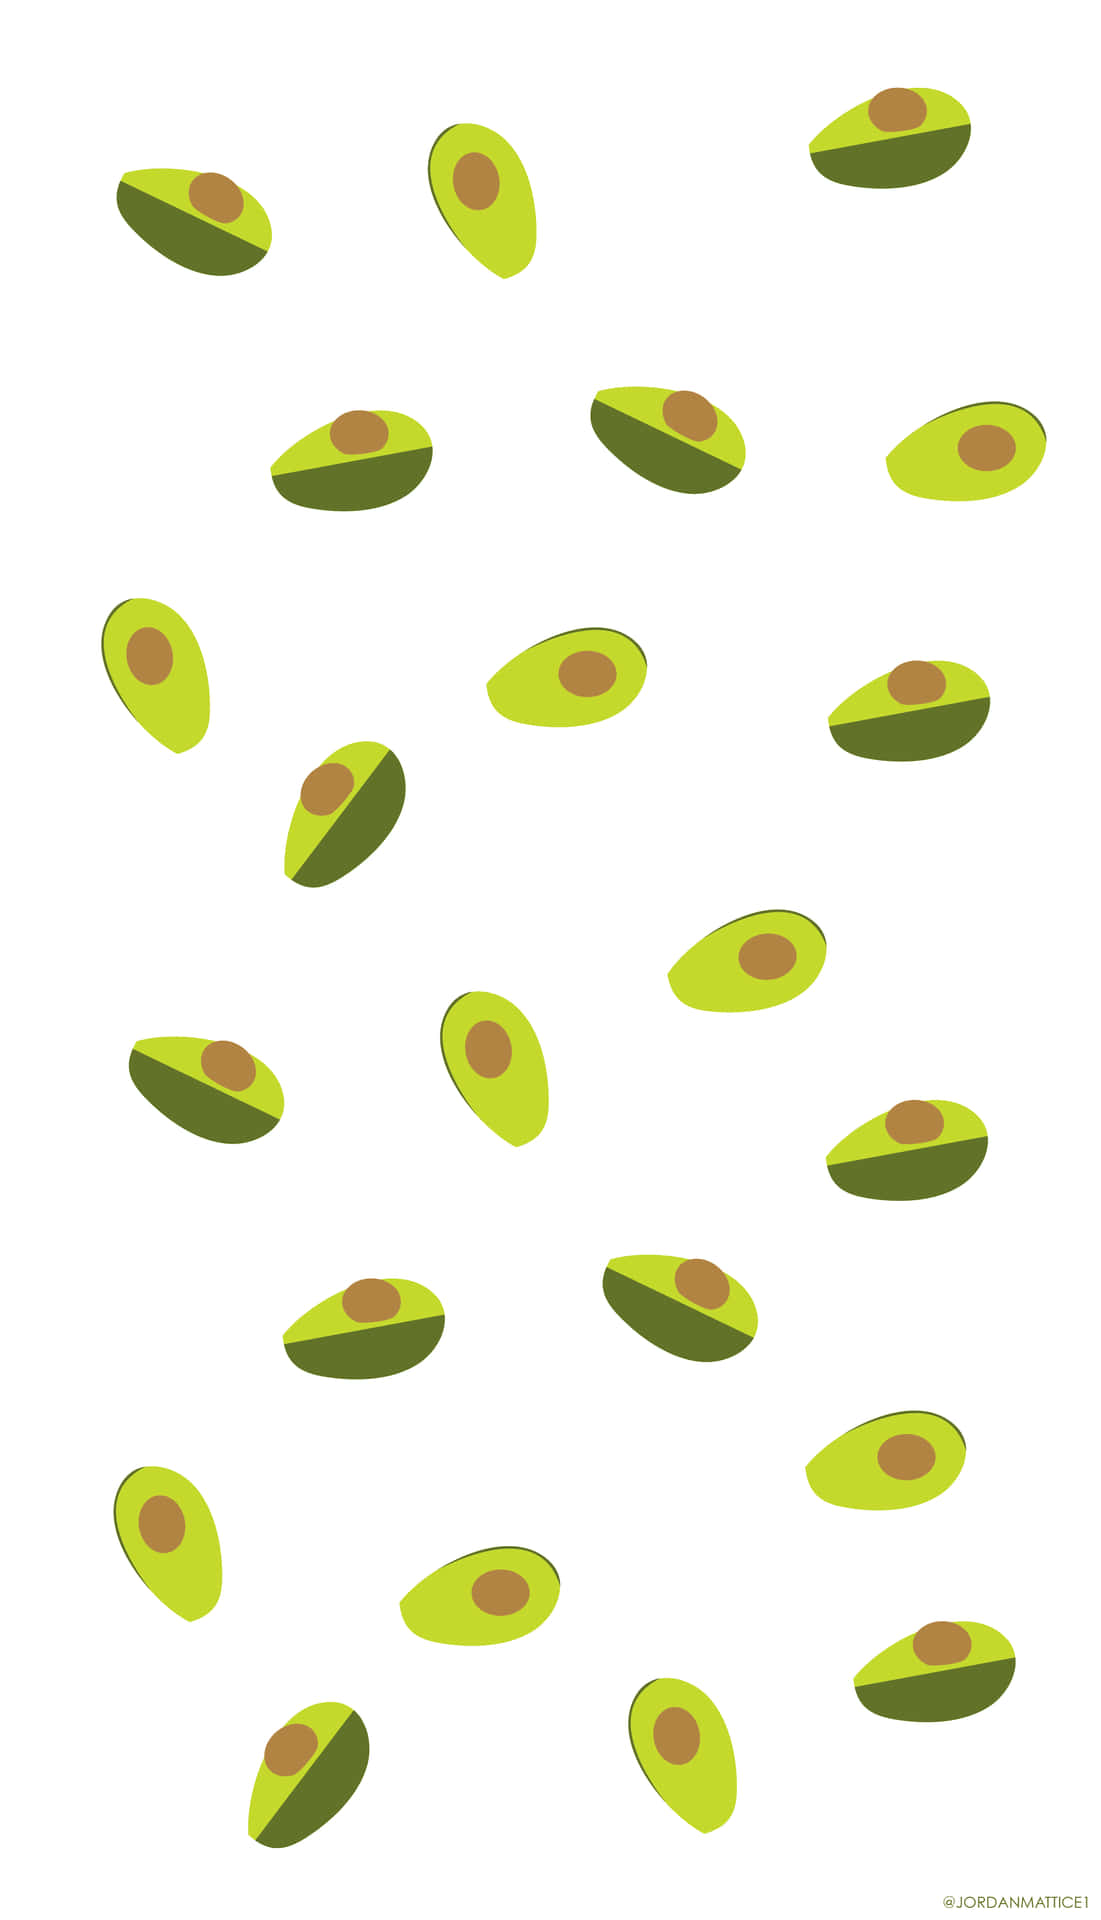 Get the most out of your device with this delicious Avocado Iphone wallpaper! Wallpaper